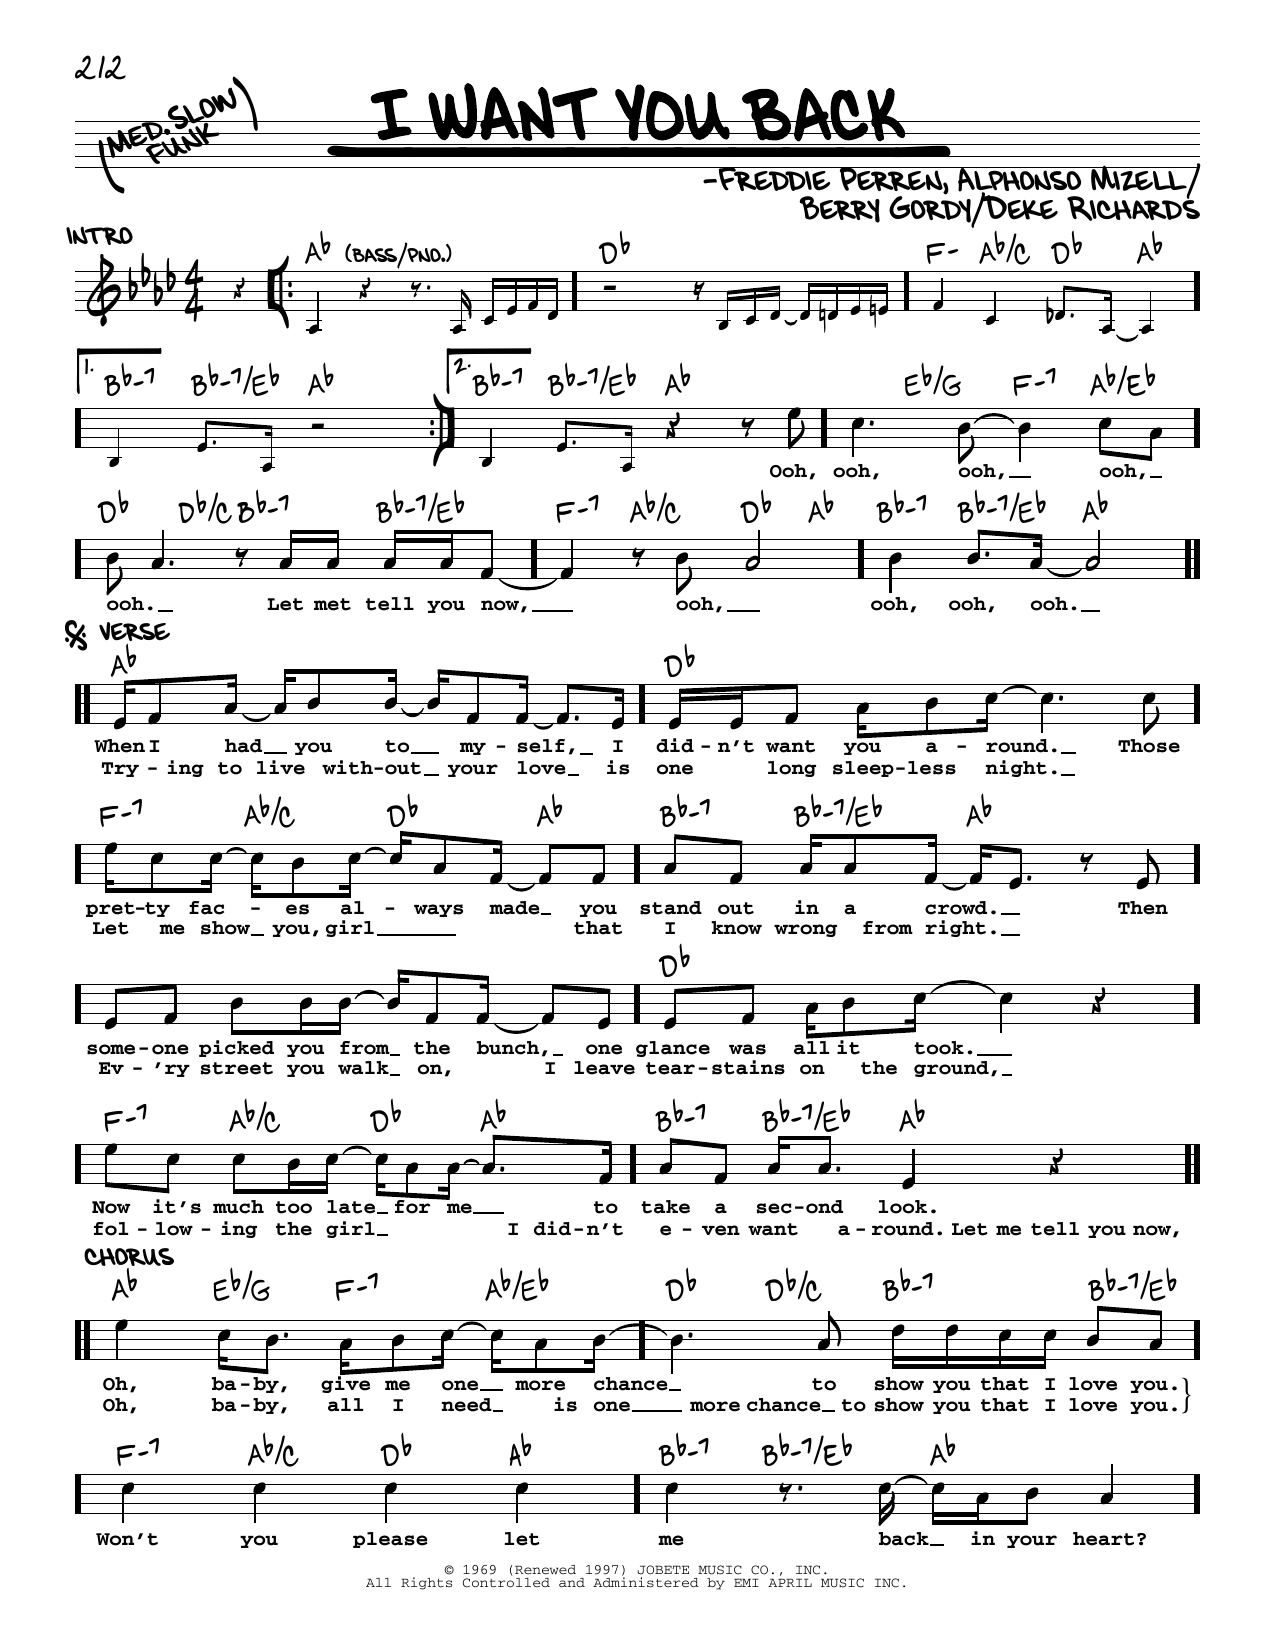 Download The Jackson 5 I Want You Back Sheet Music